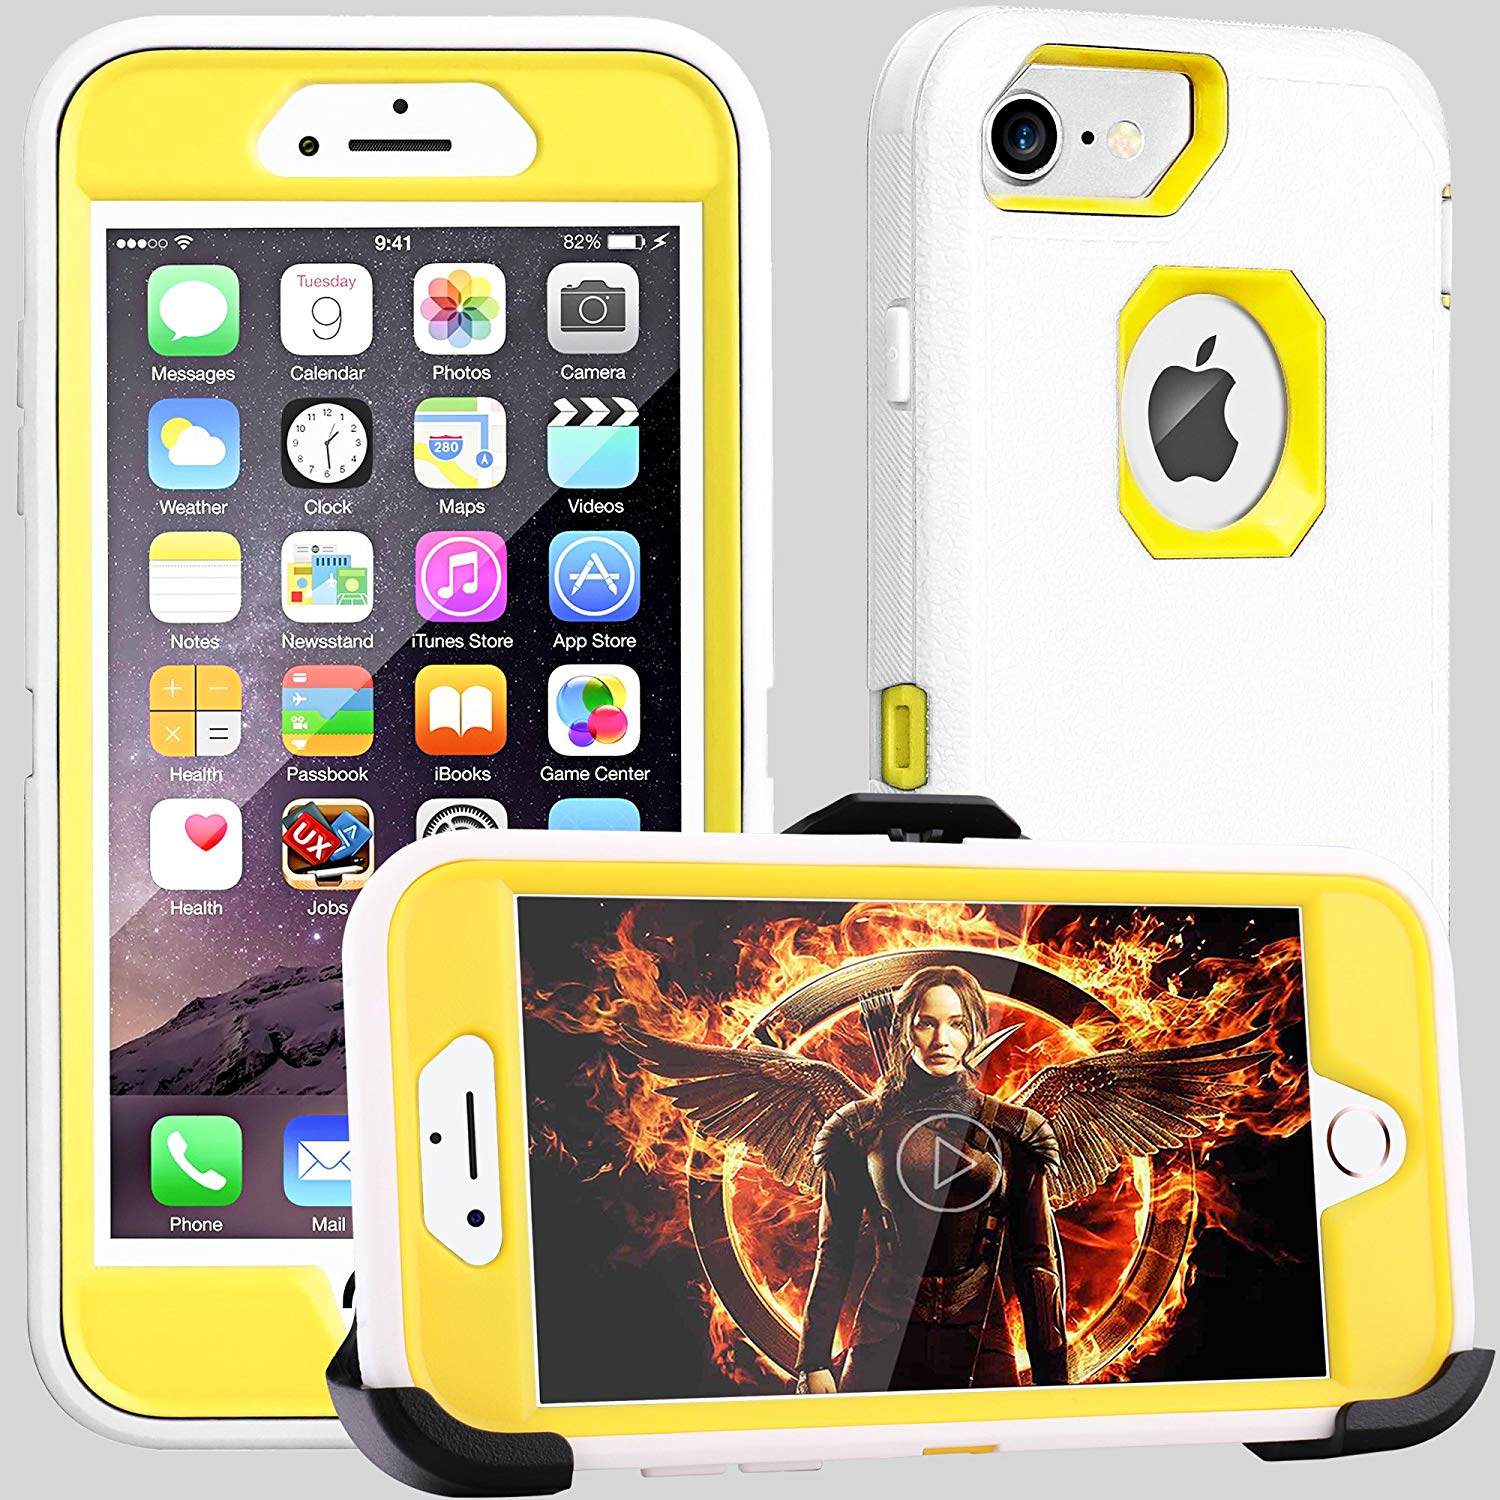 iPhone 8 case,iPhone 7 Case, iPhone 6s Case, FOGEEK [Dust-Proof] Belt-Clip Heavy Duty Kickstand Cover [Shockproof] Rugged Armor PC+TPU Shell for Apple iPhone 7 and iPhone 6/6s (White and Yellow) …